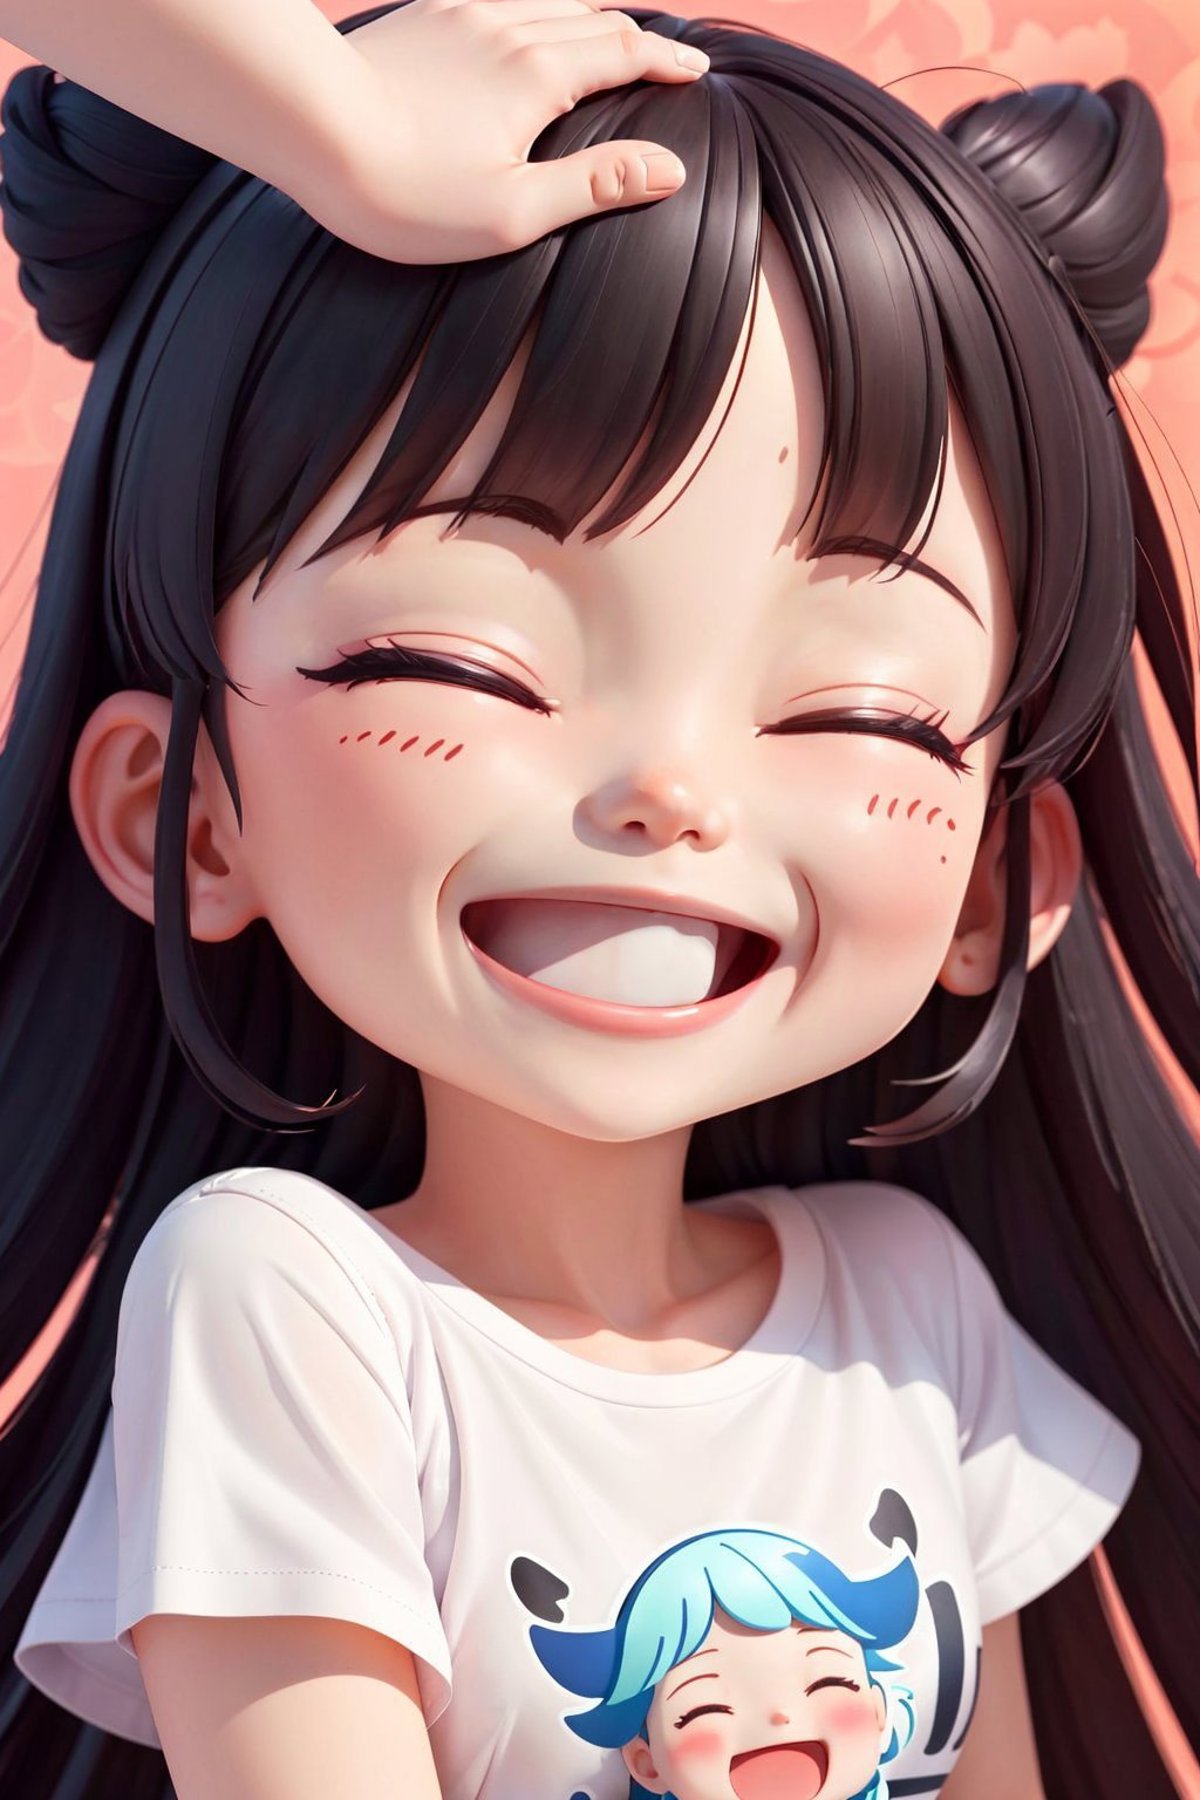 A happy anime girl with a smile and pink lips.